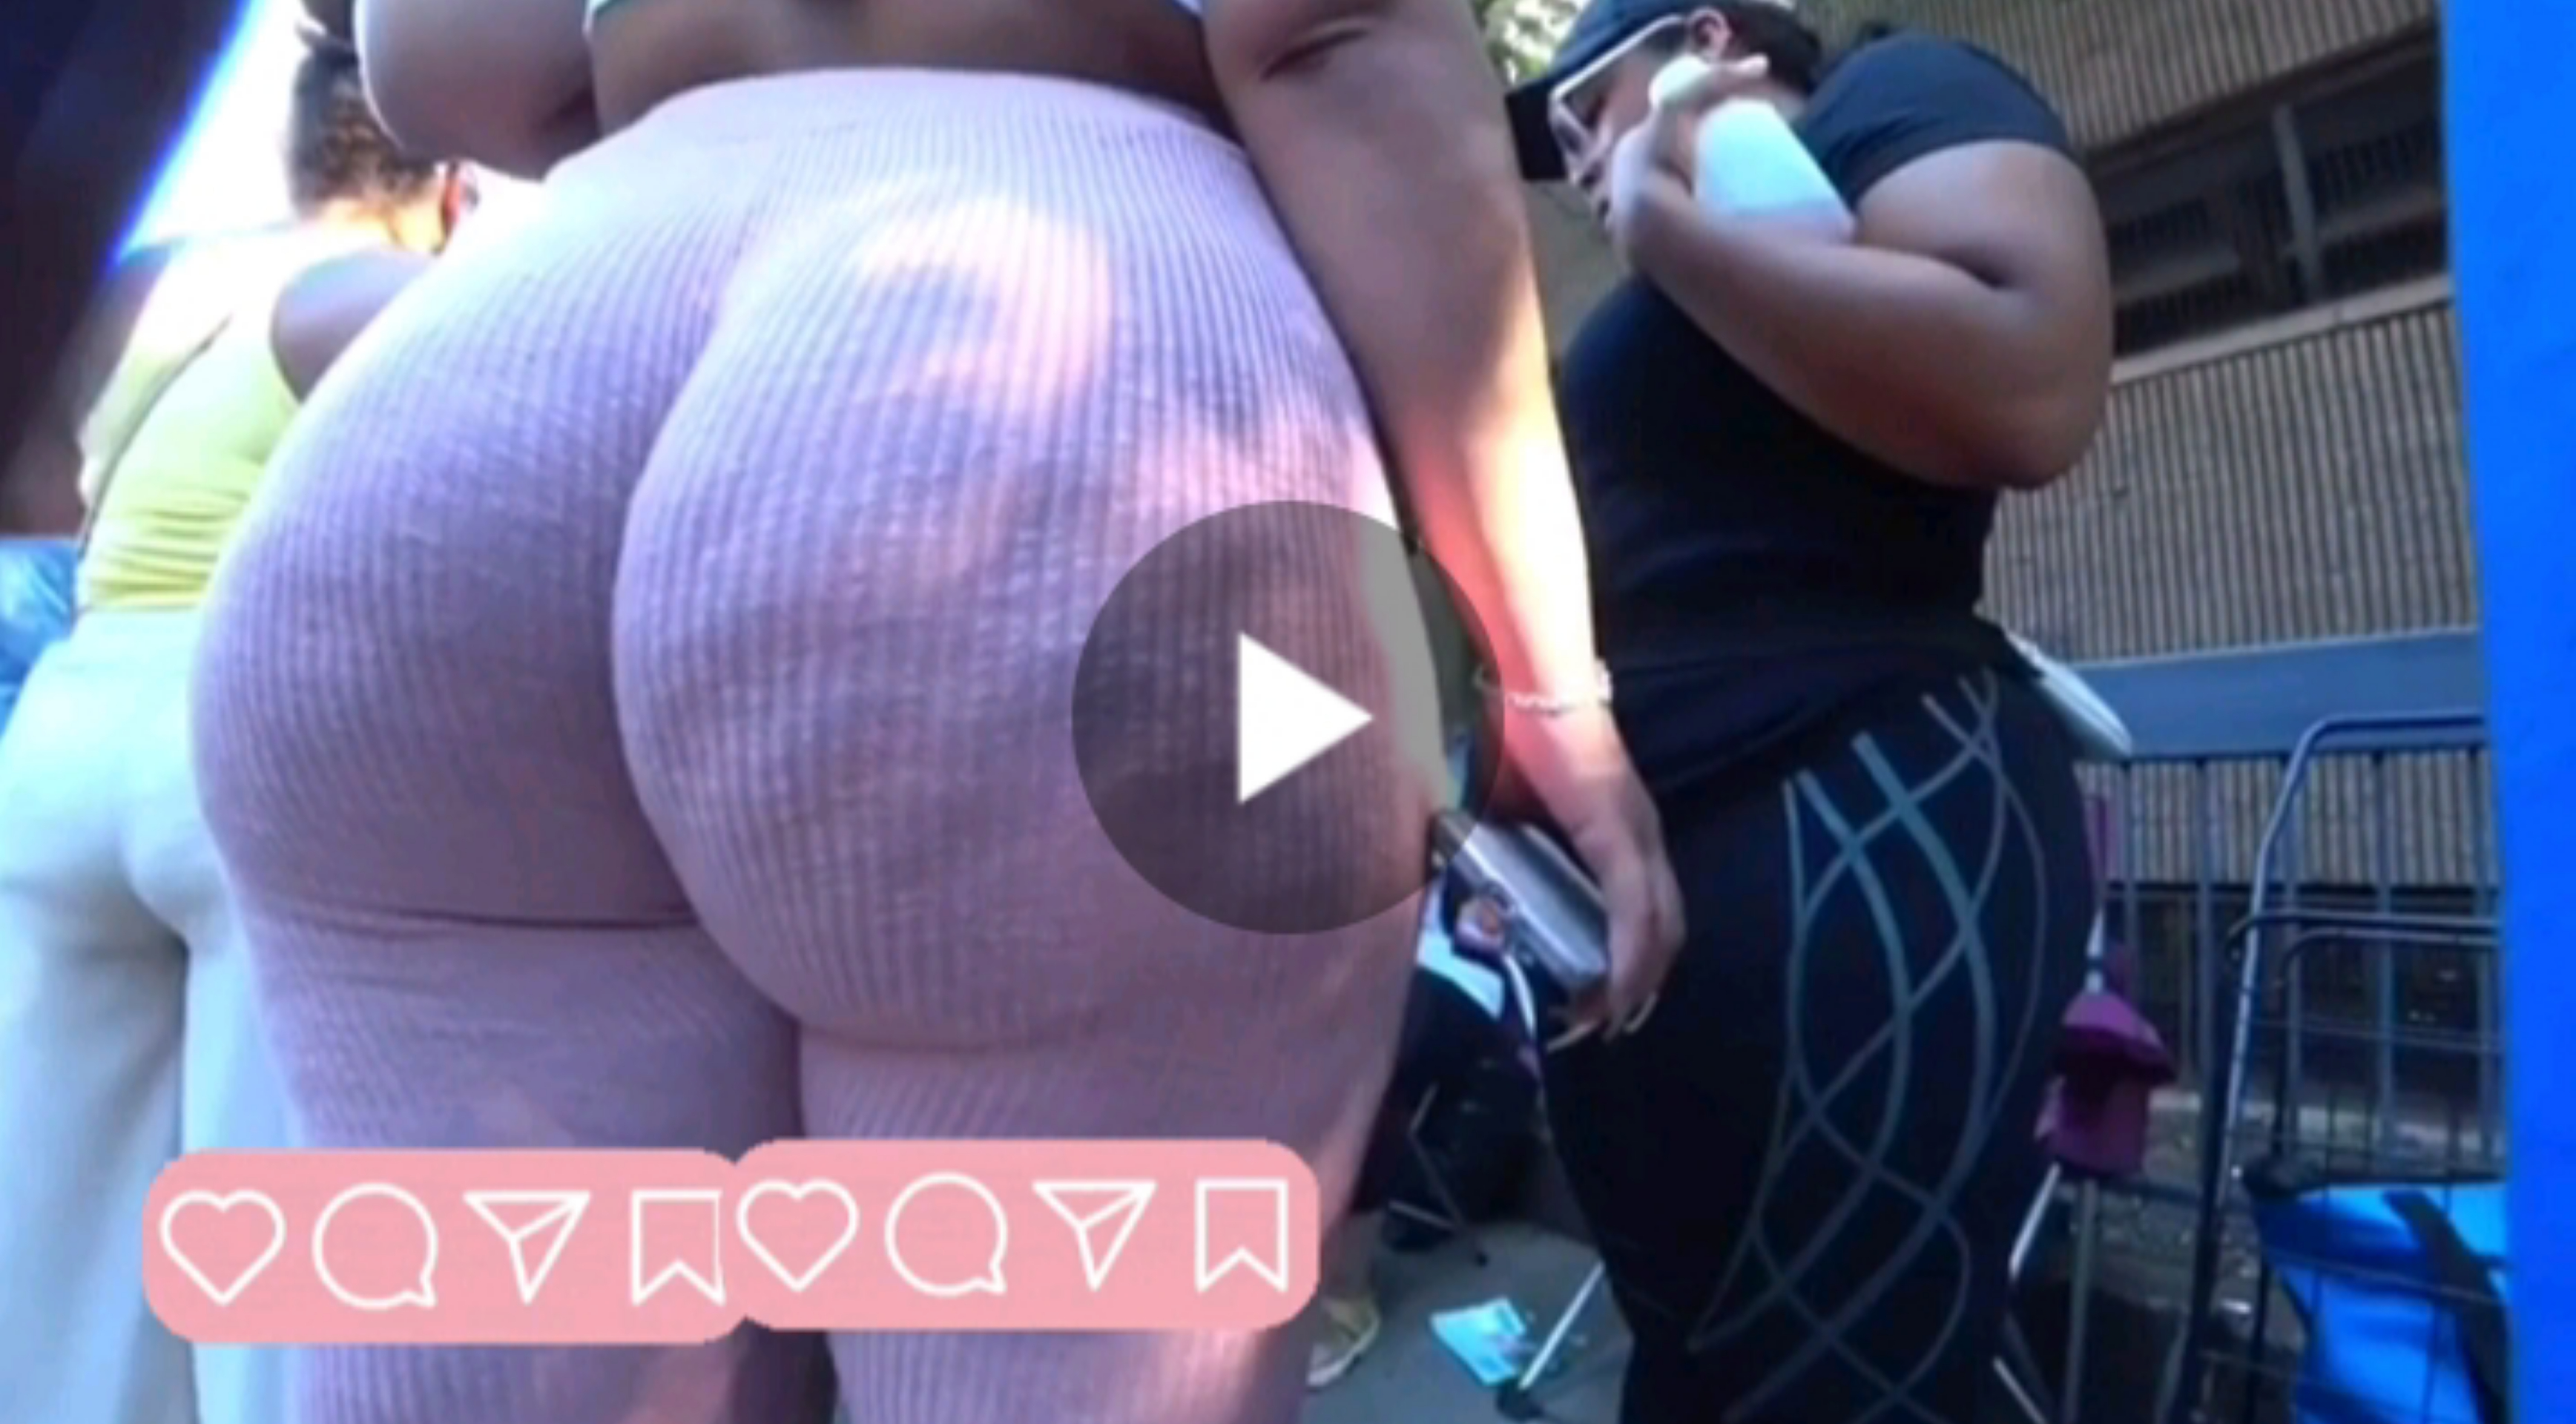 I LOVE IT WHEN THE WEDGIE IS DEEP IN THE ASS CRACK - video 2